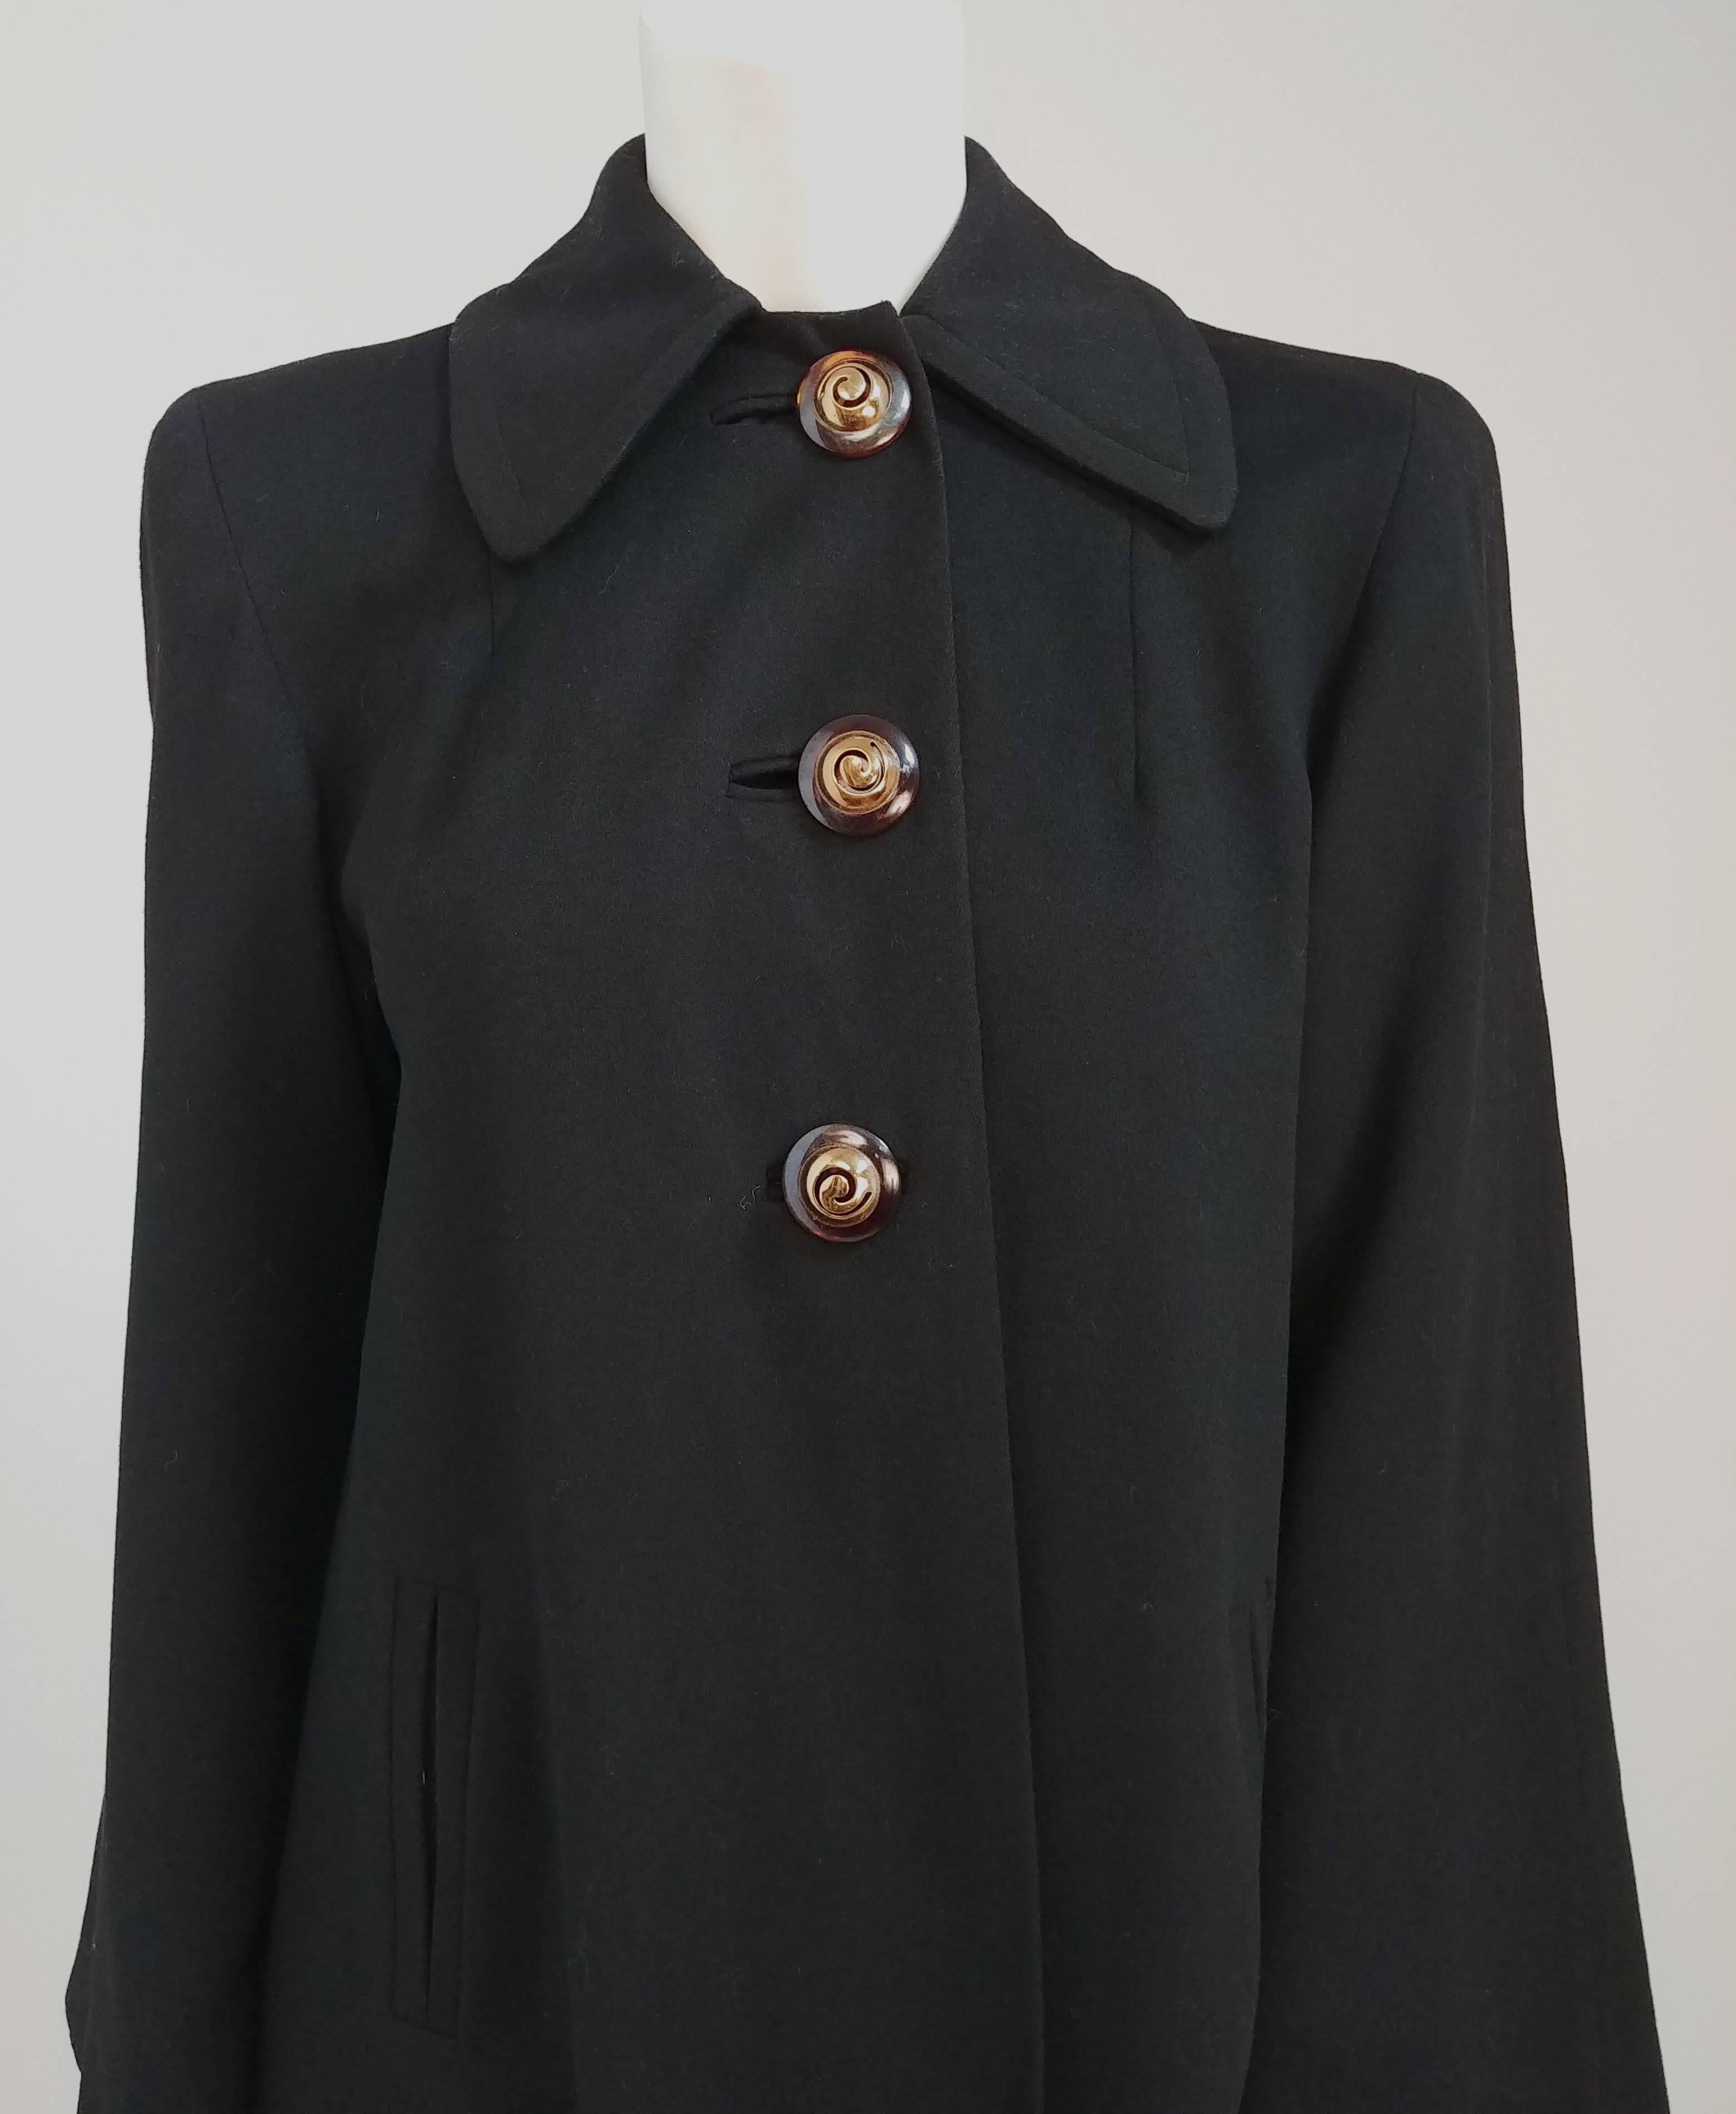 1960s Black Wool Coat w/ Gold Tone Buttons. Approx. US Size 6-8. Large decorative buttons in gold tone and classic 1960's collar. A-line silhouette. 